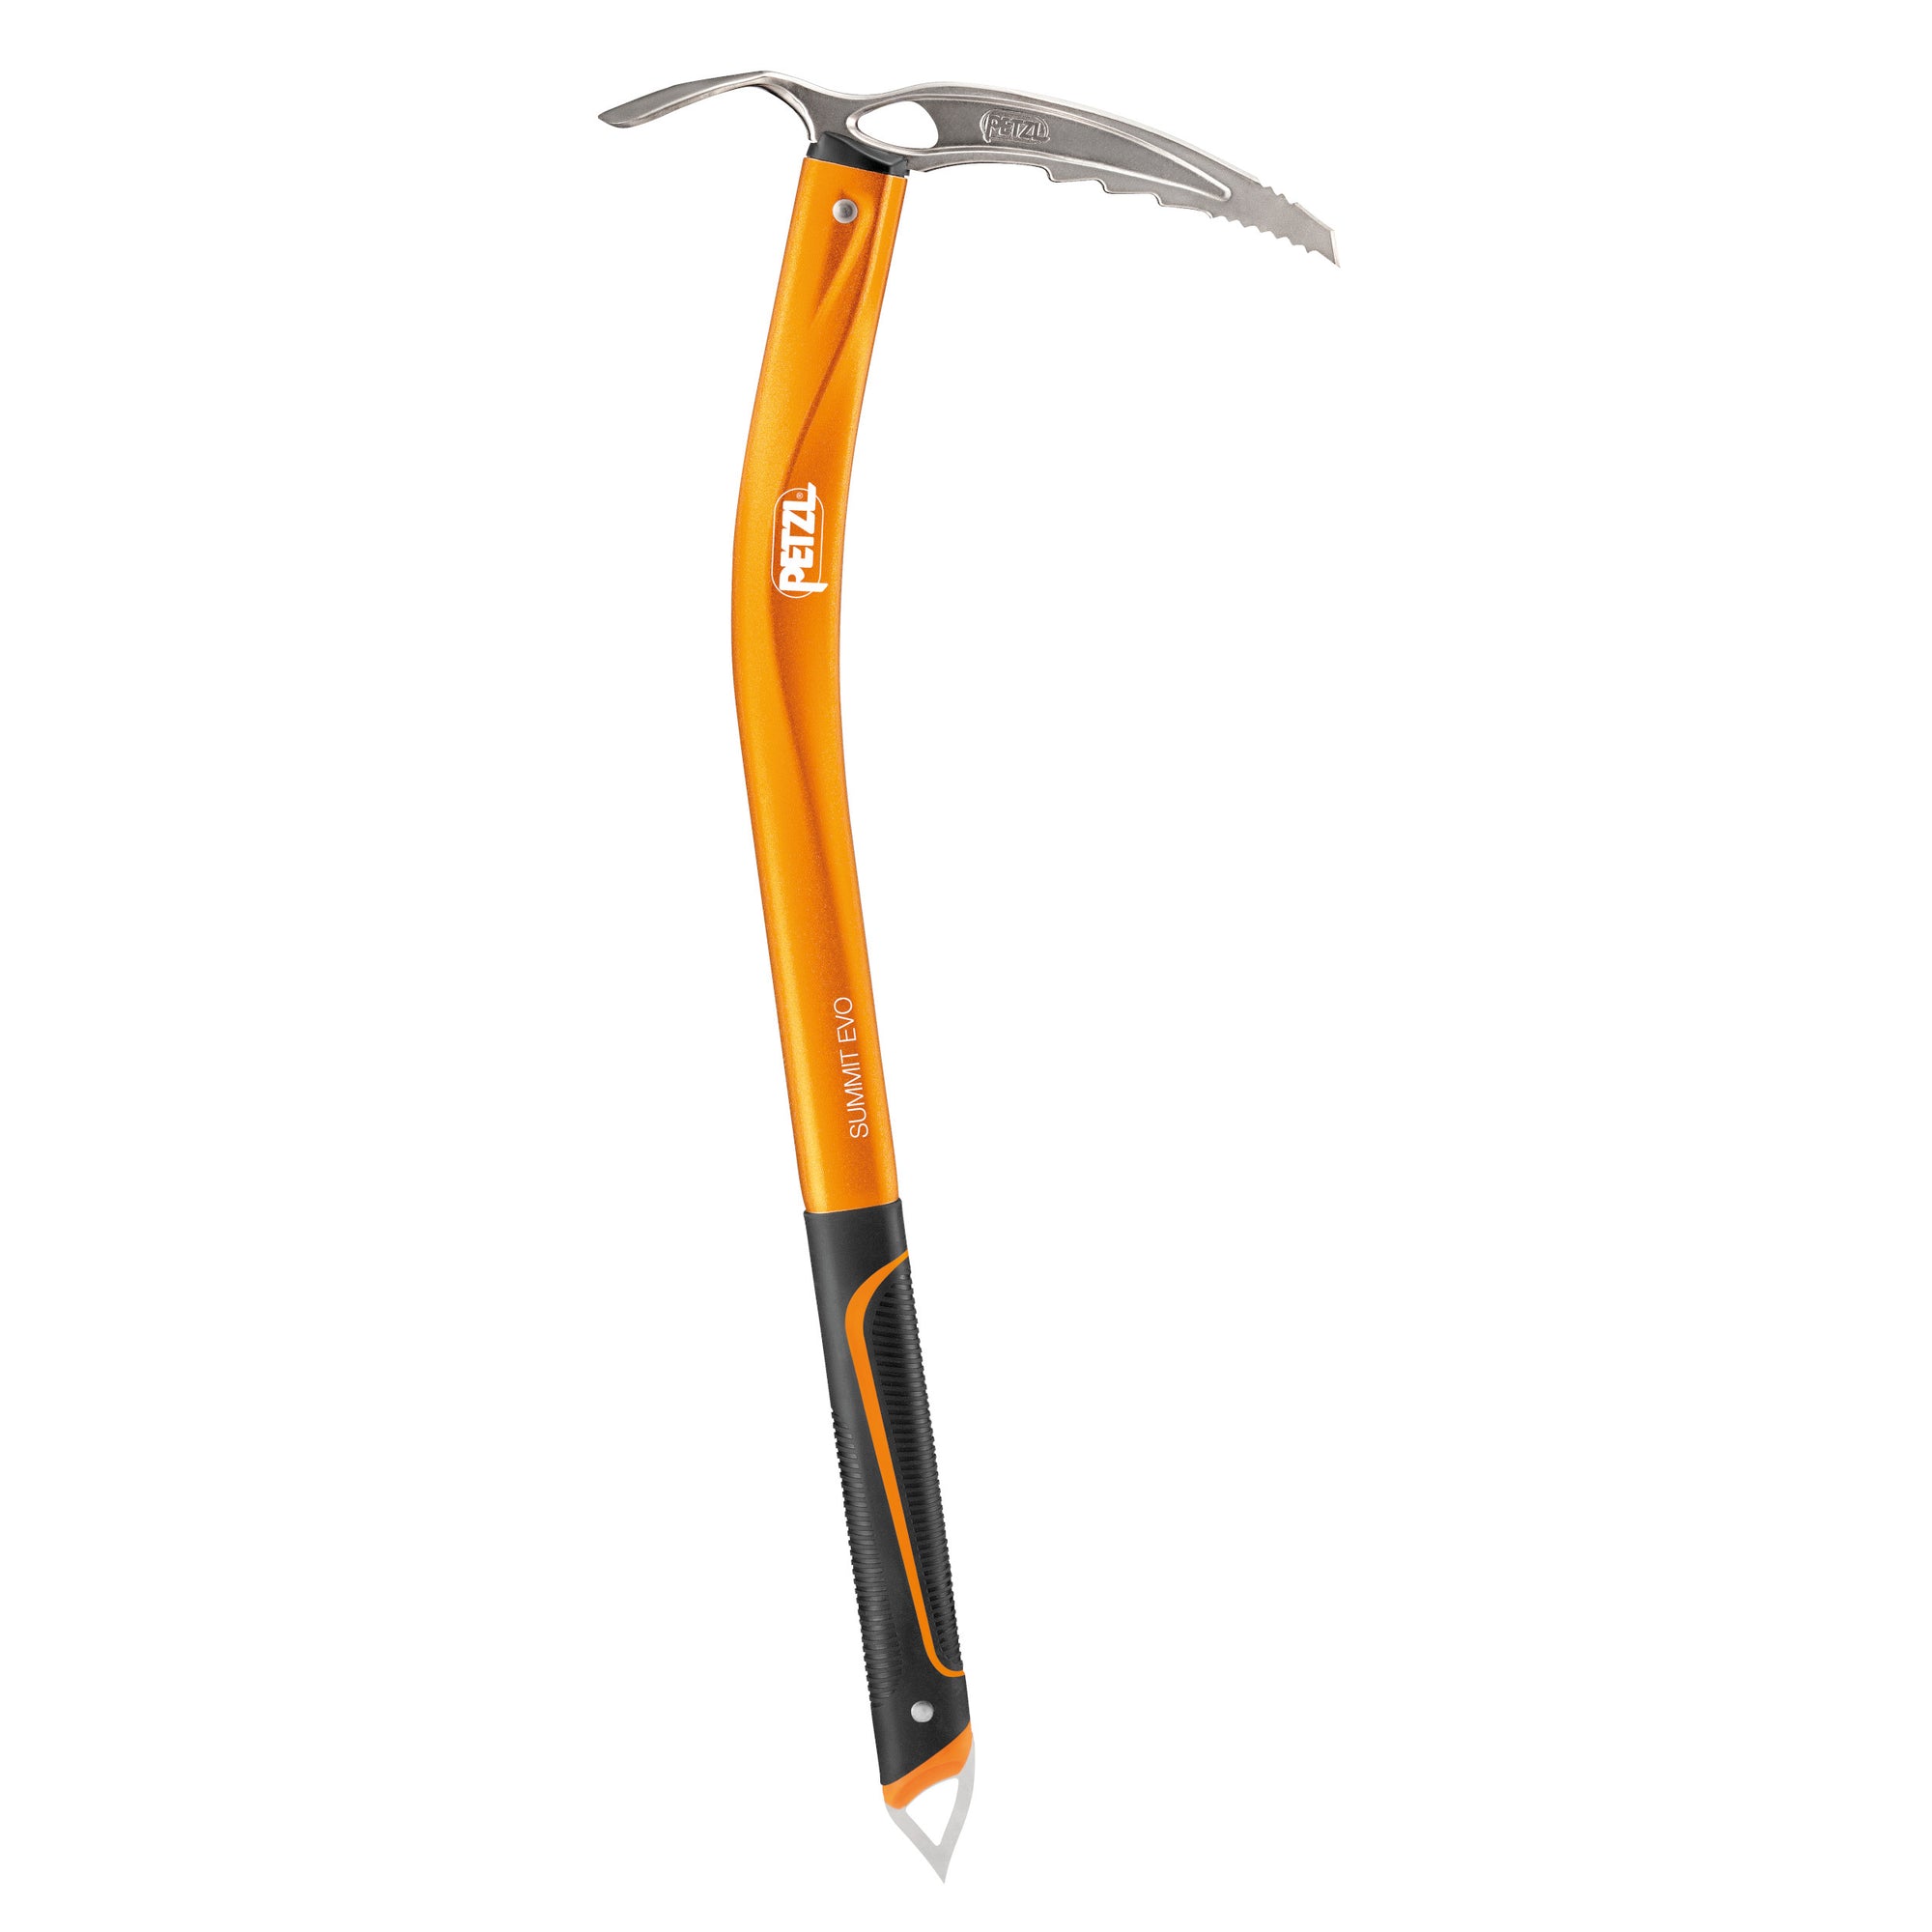 Petzl Summit Evo Ice Axe, shown stood upright with black handle, orange shaft and silver pick